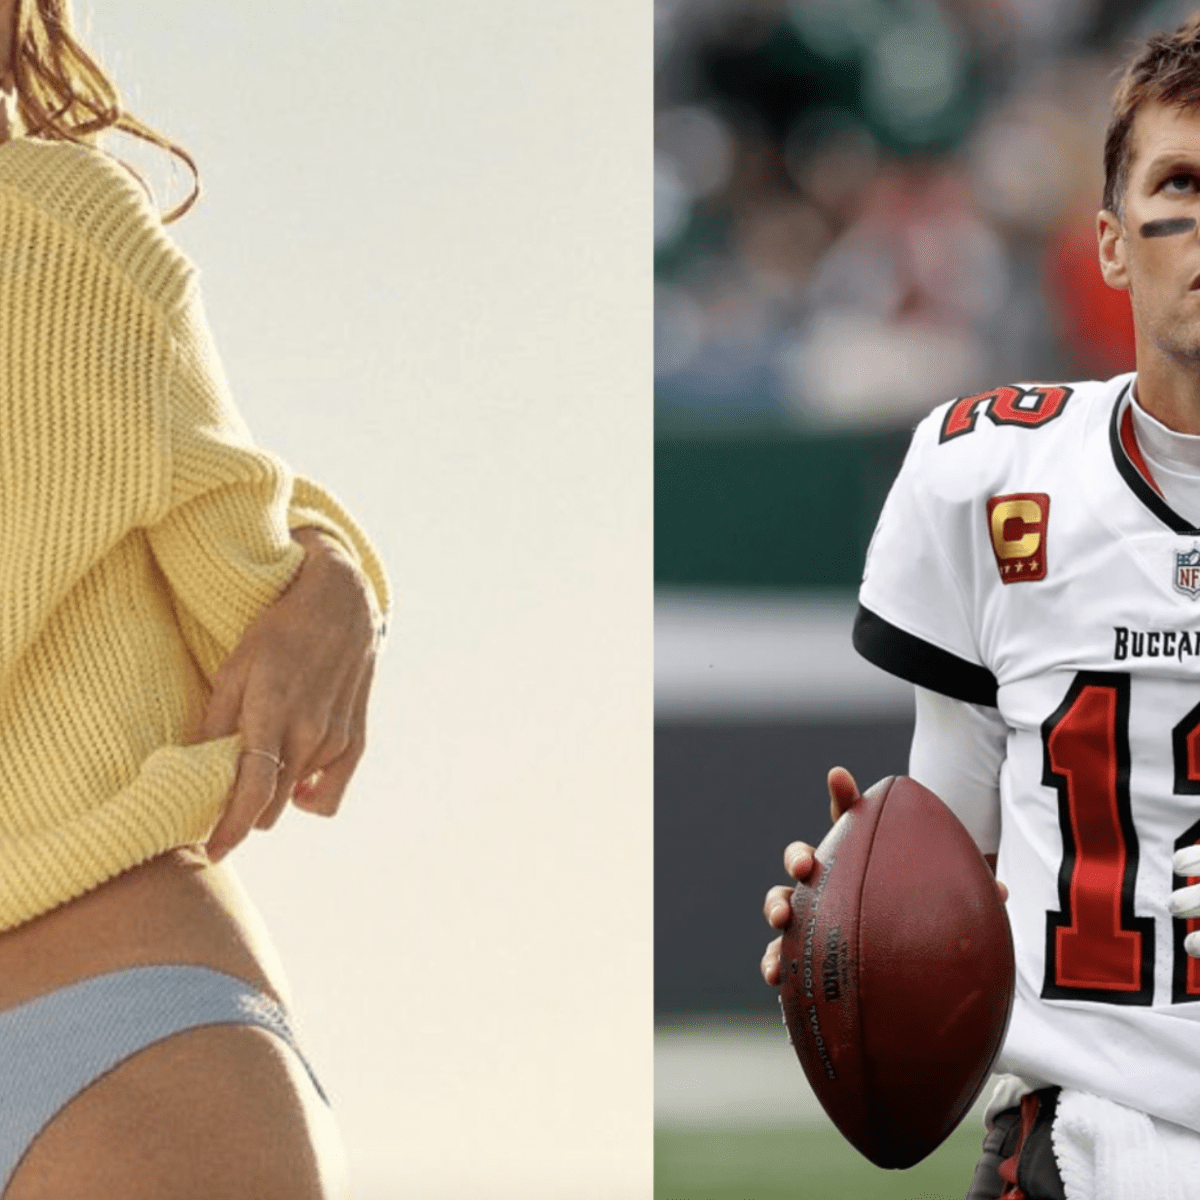 Tom Brady Rumored To Be Dating “Superstar Blonde” As Fans